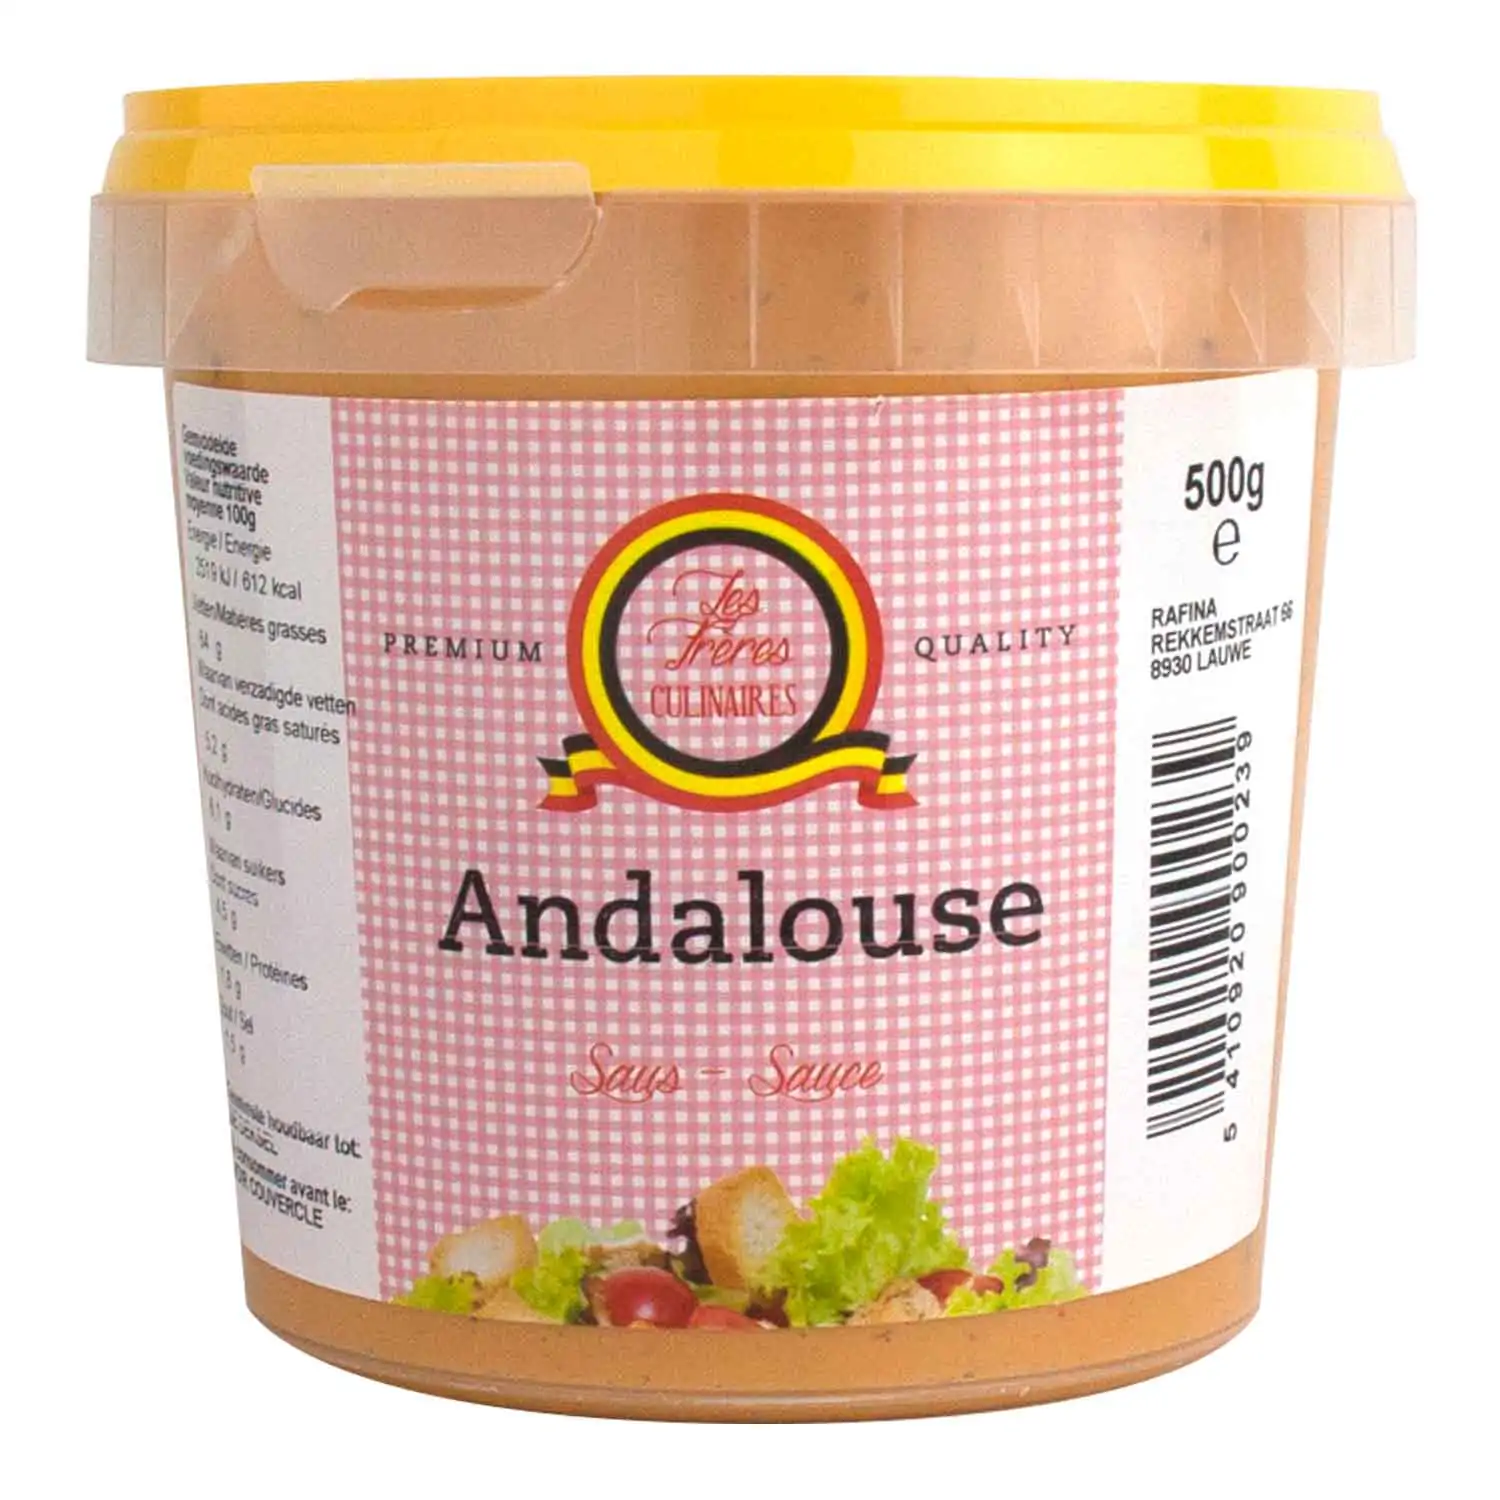 Les Frères Culinaires andalouse 500g - Buy at Real Tobacco